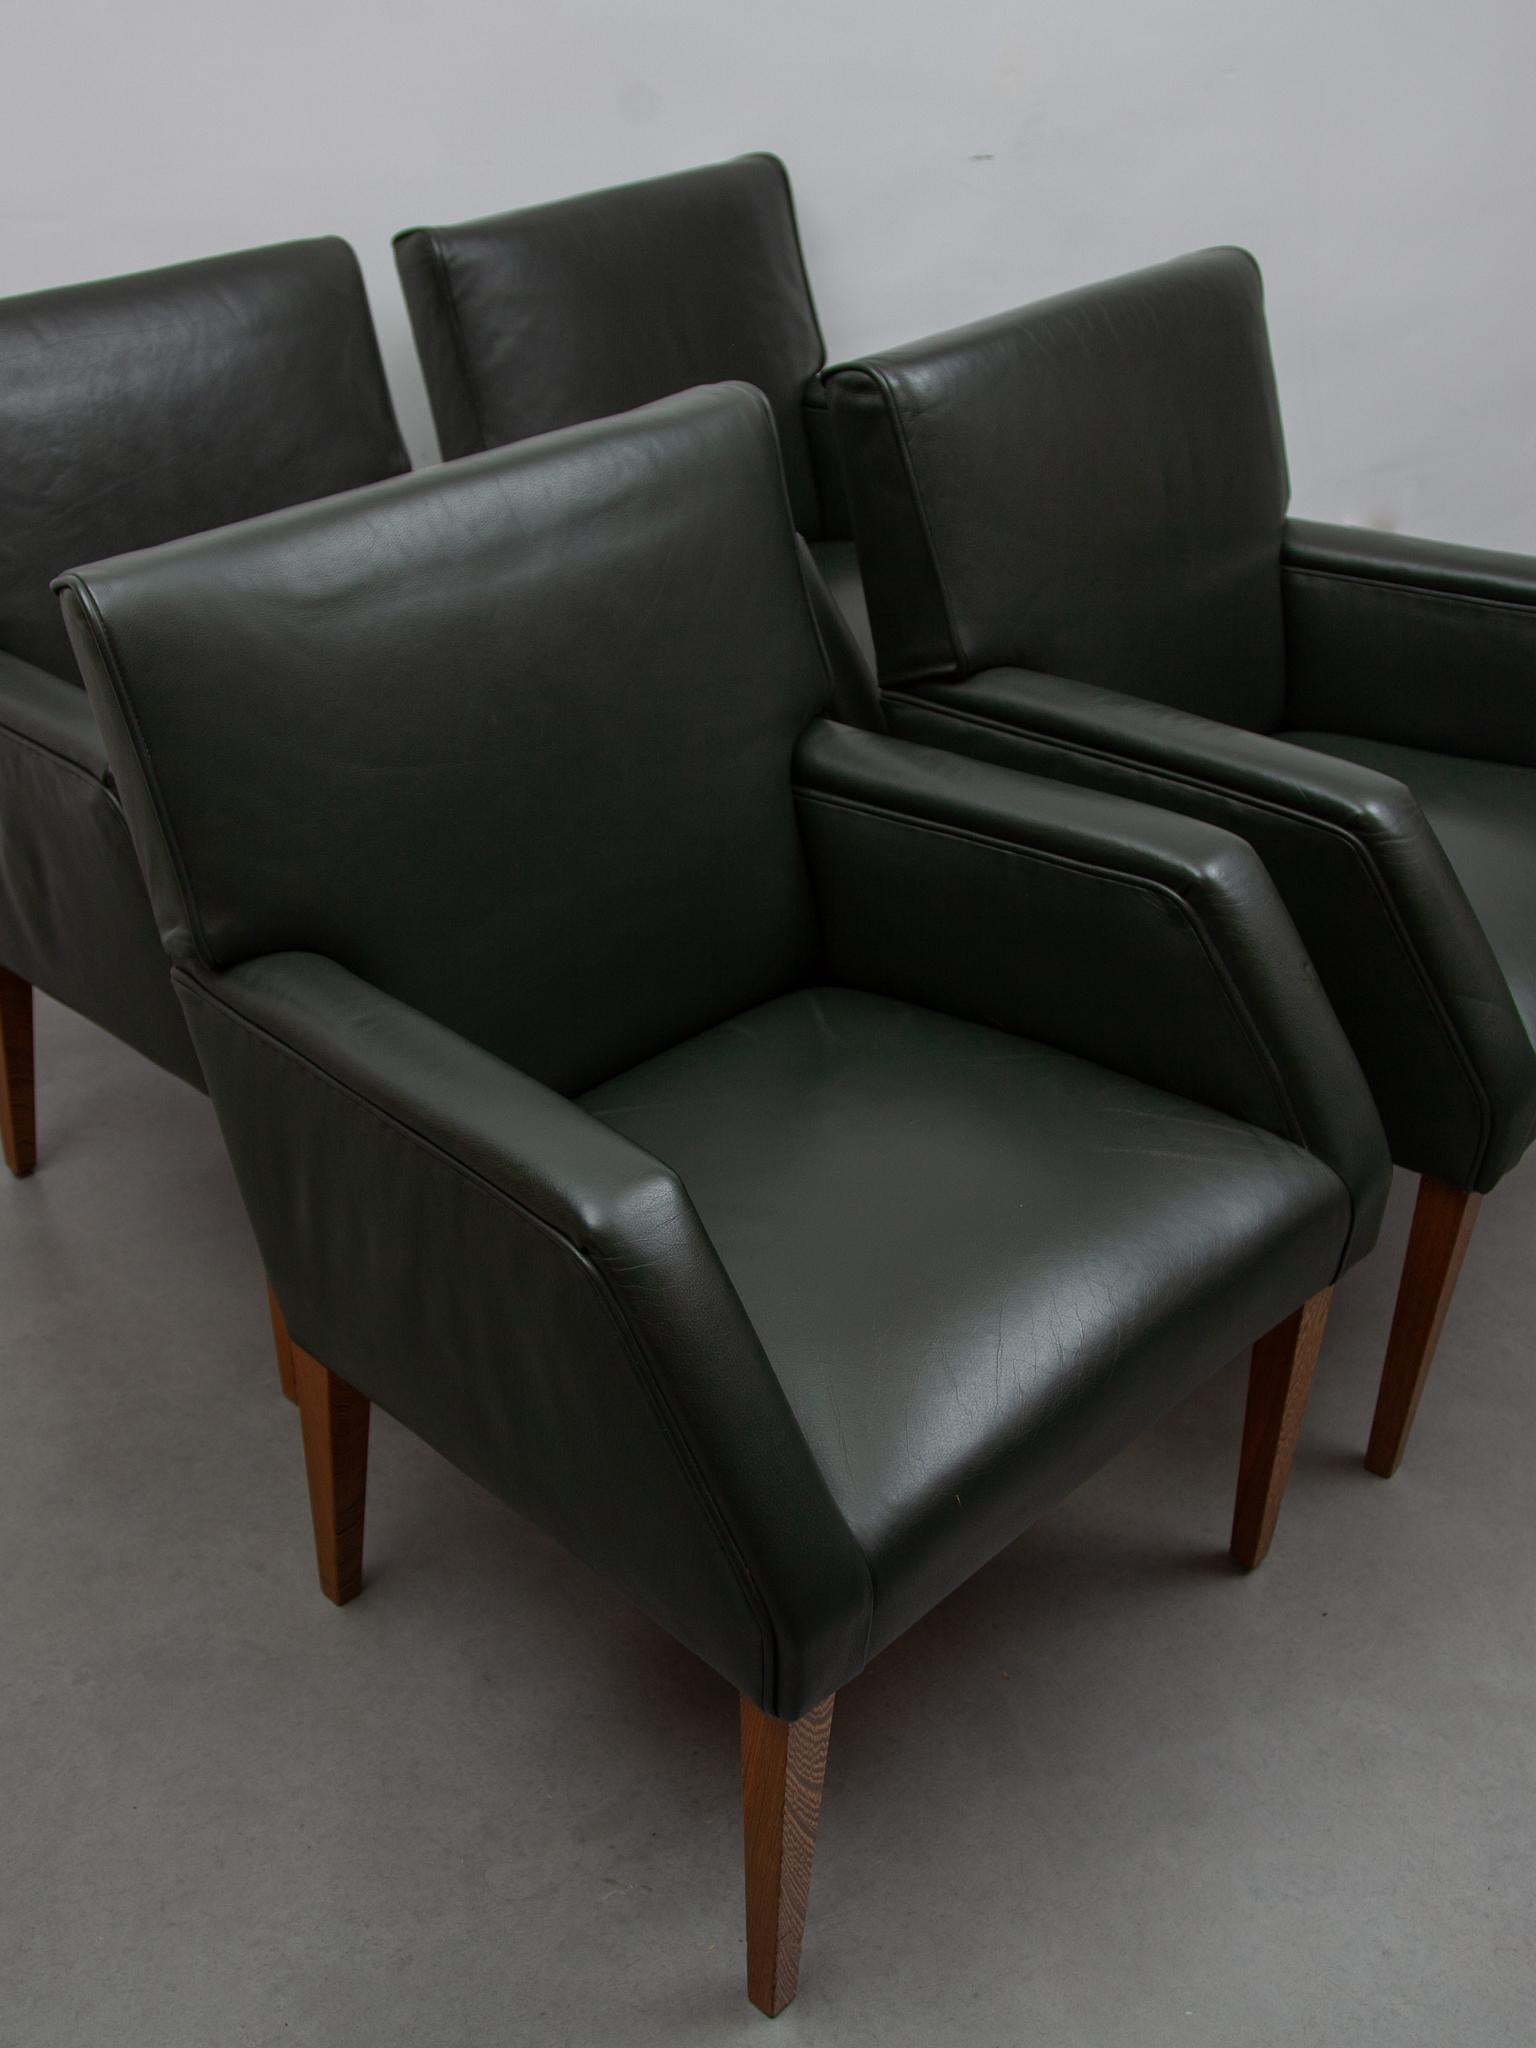 Set of Four Green Leather Arm Lounge Chairs, Denmark For Sale 5